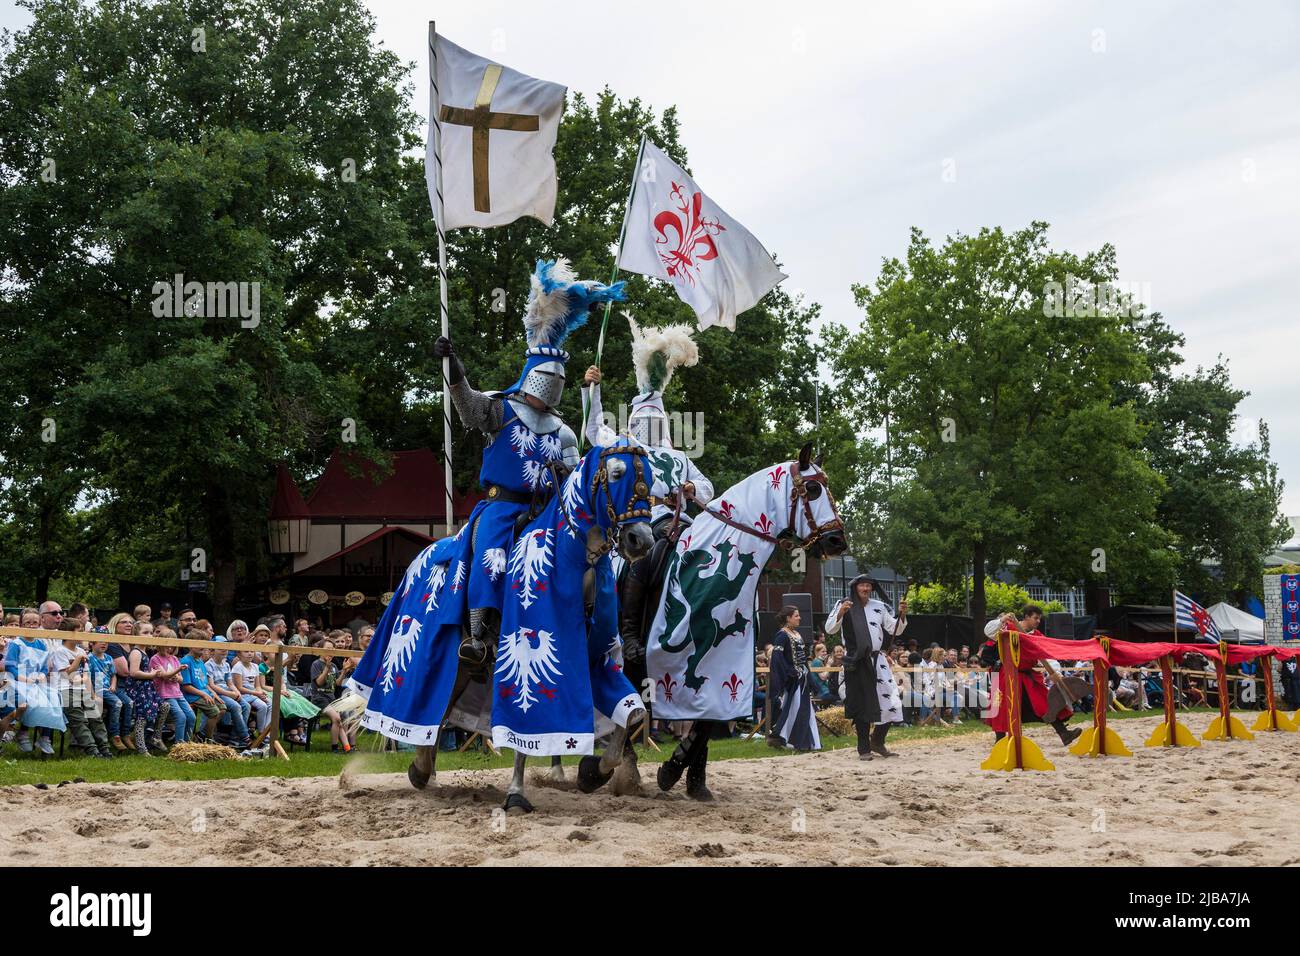 Pfingst-Spektakulum in Muelheim an der Ruhr, Germany. Knights on horseback. Event with a medieval knights tournament with camp and crafts market in Müga-Park near Schloss Broich castle. Stock Photo